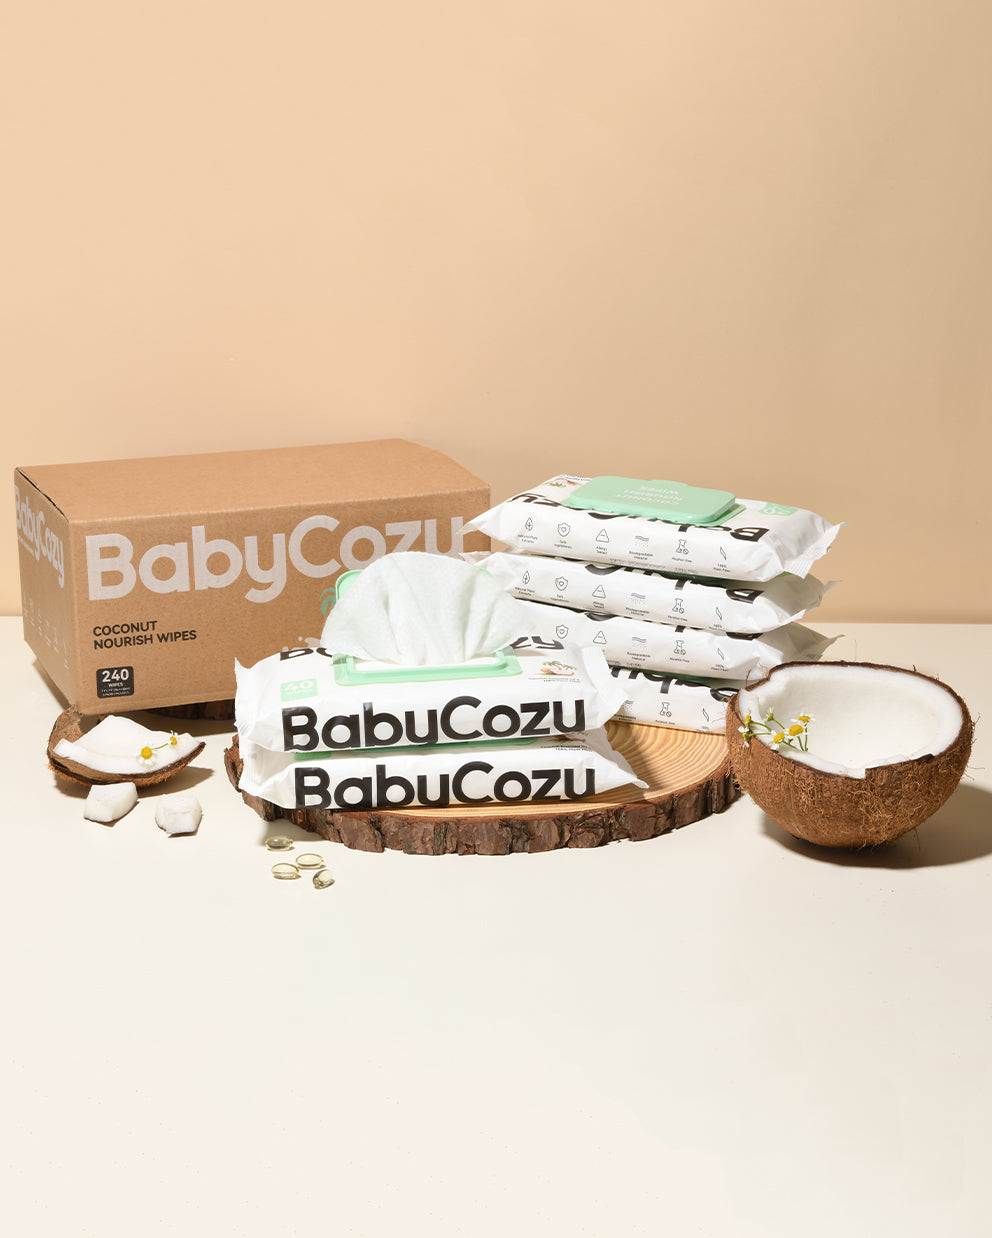  Baby Wipes, Momcozy Saline Nose and Face Wipes, Made